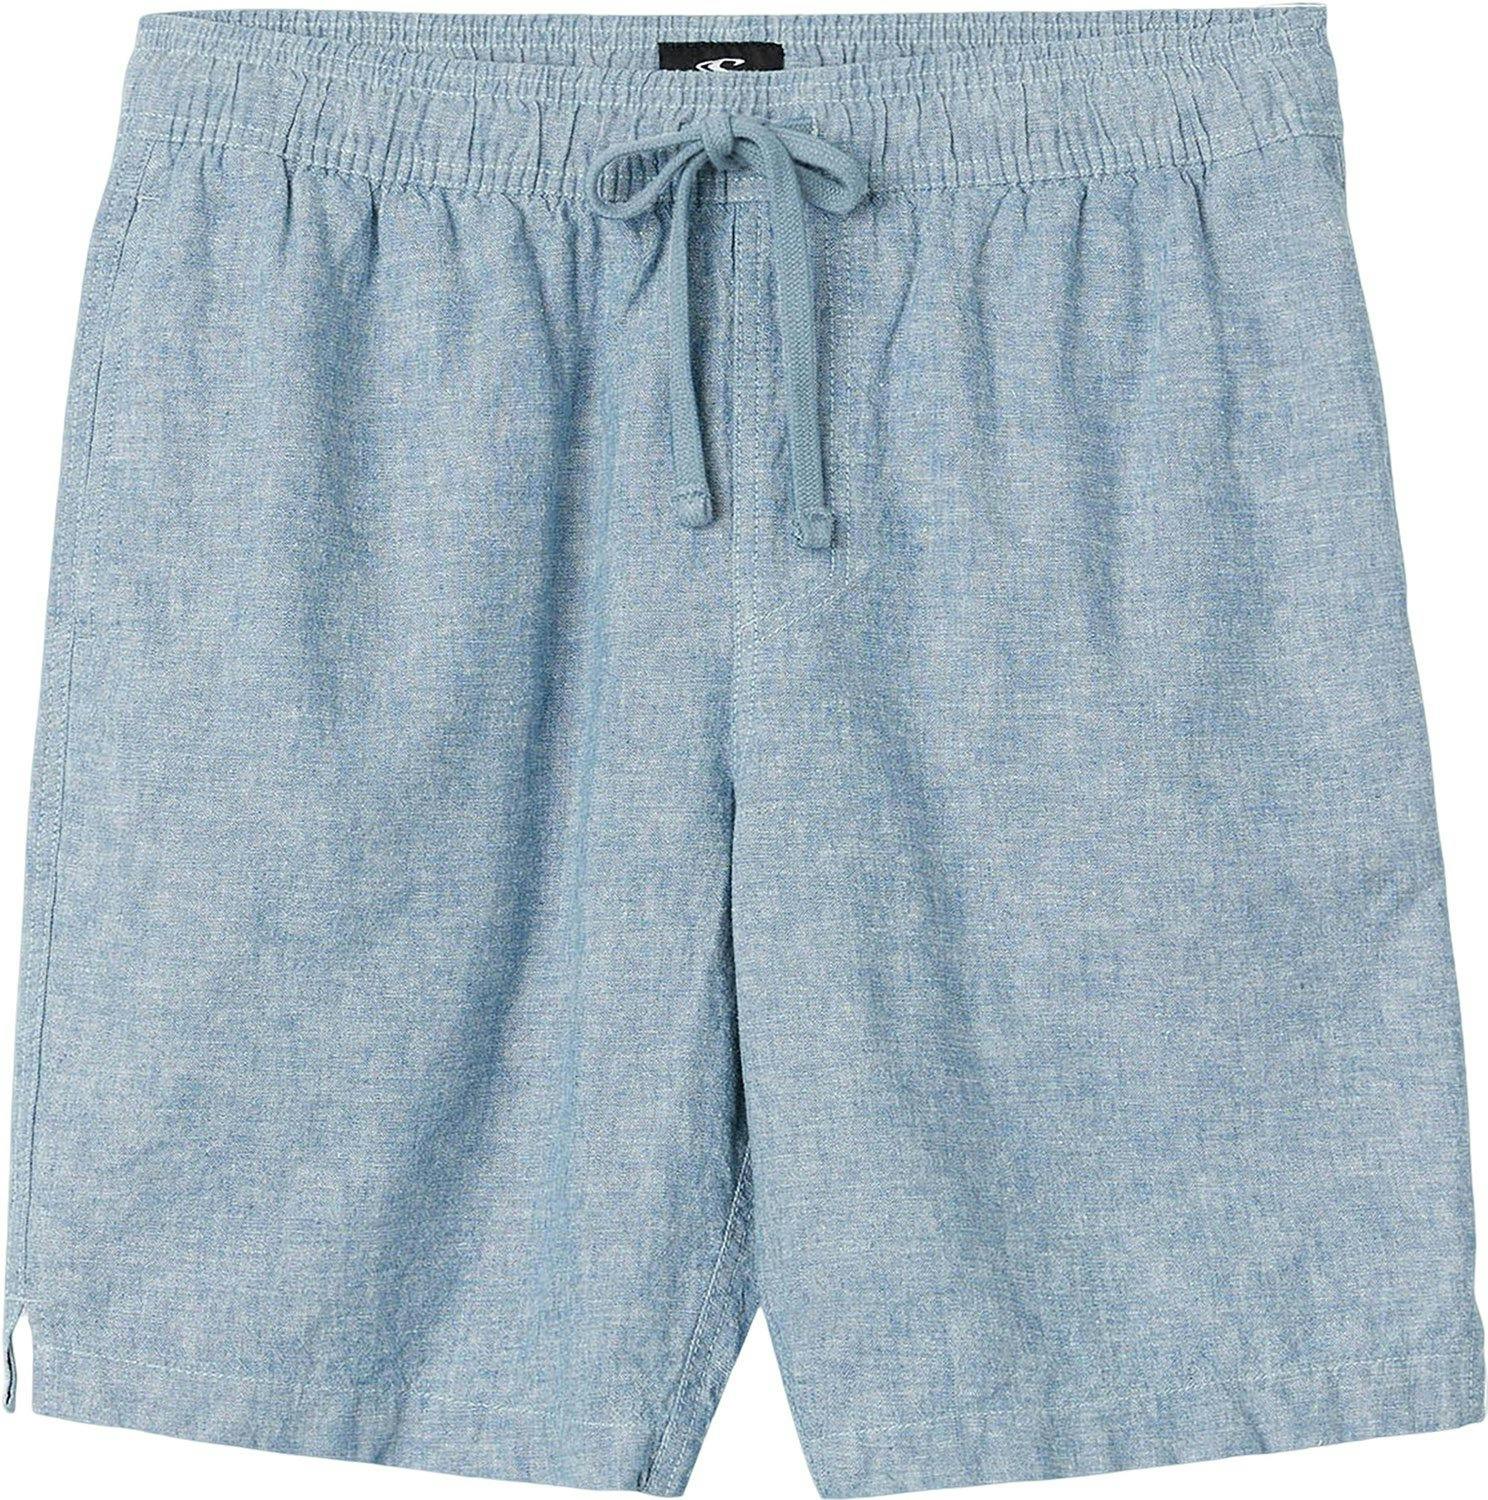 Product image for Low Key Solid Short - Men's